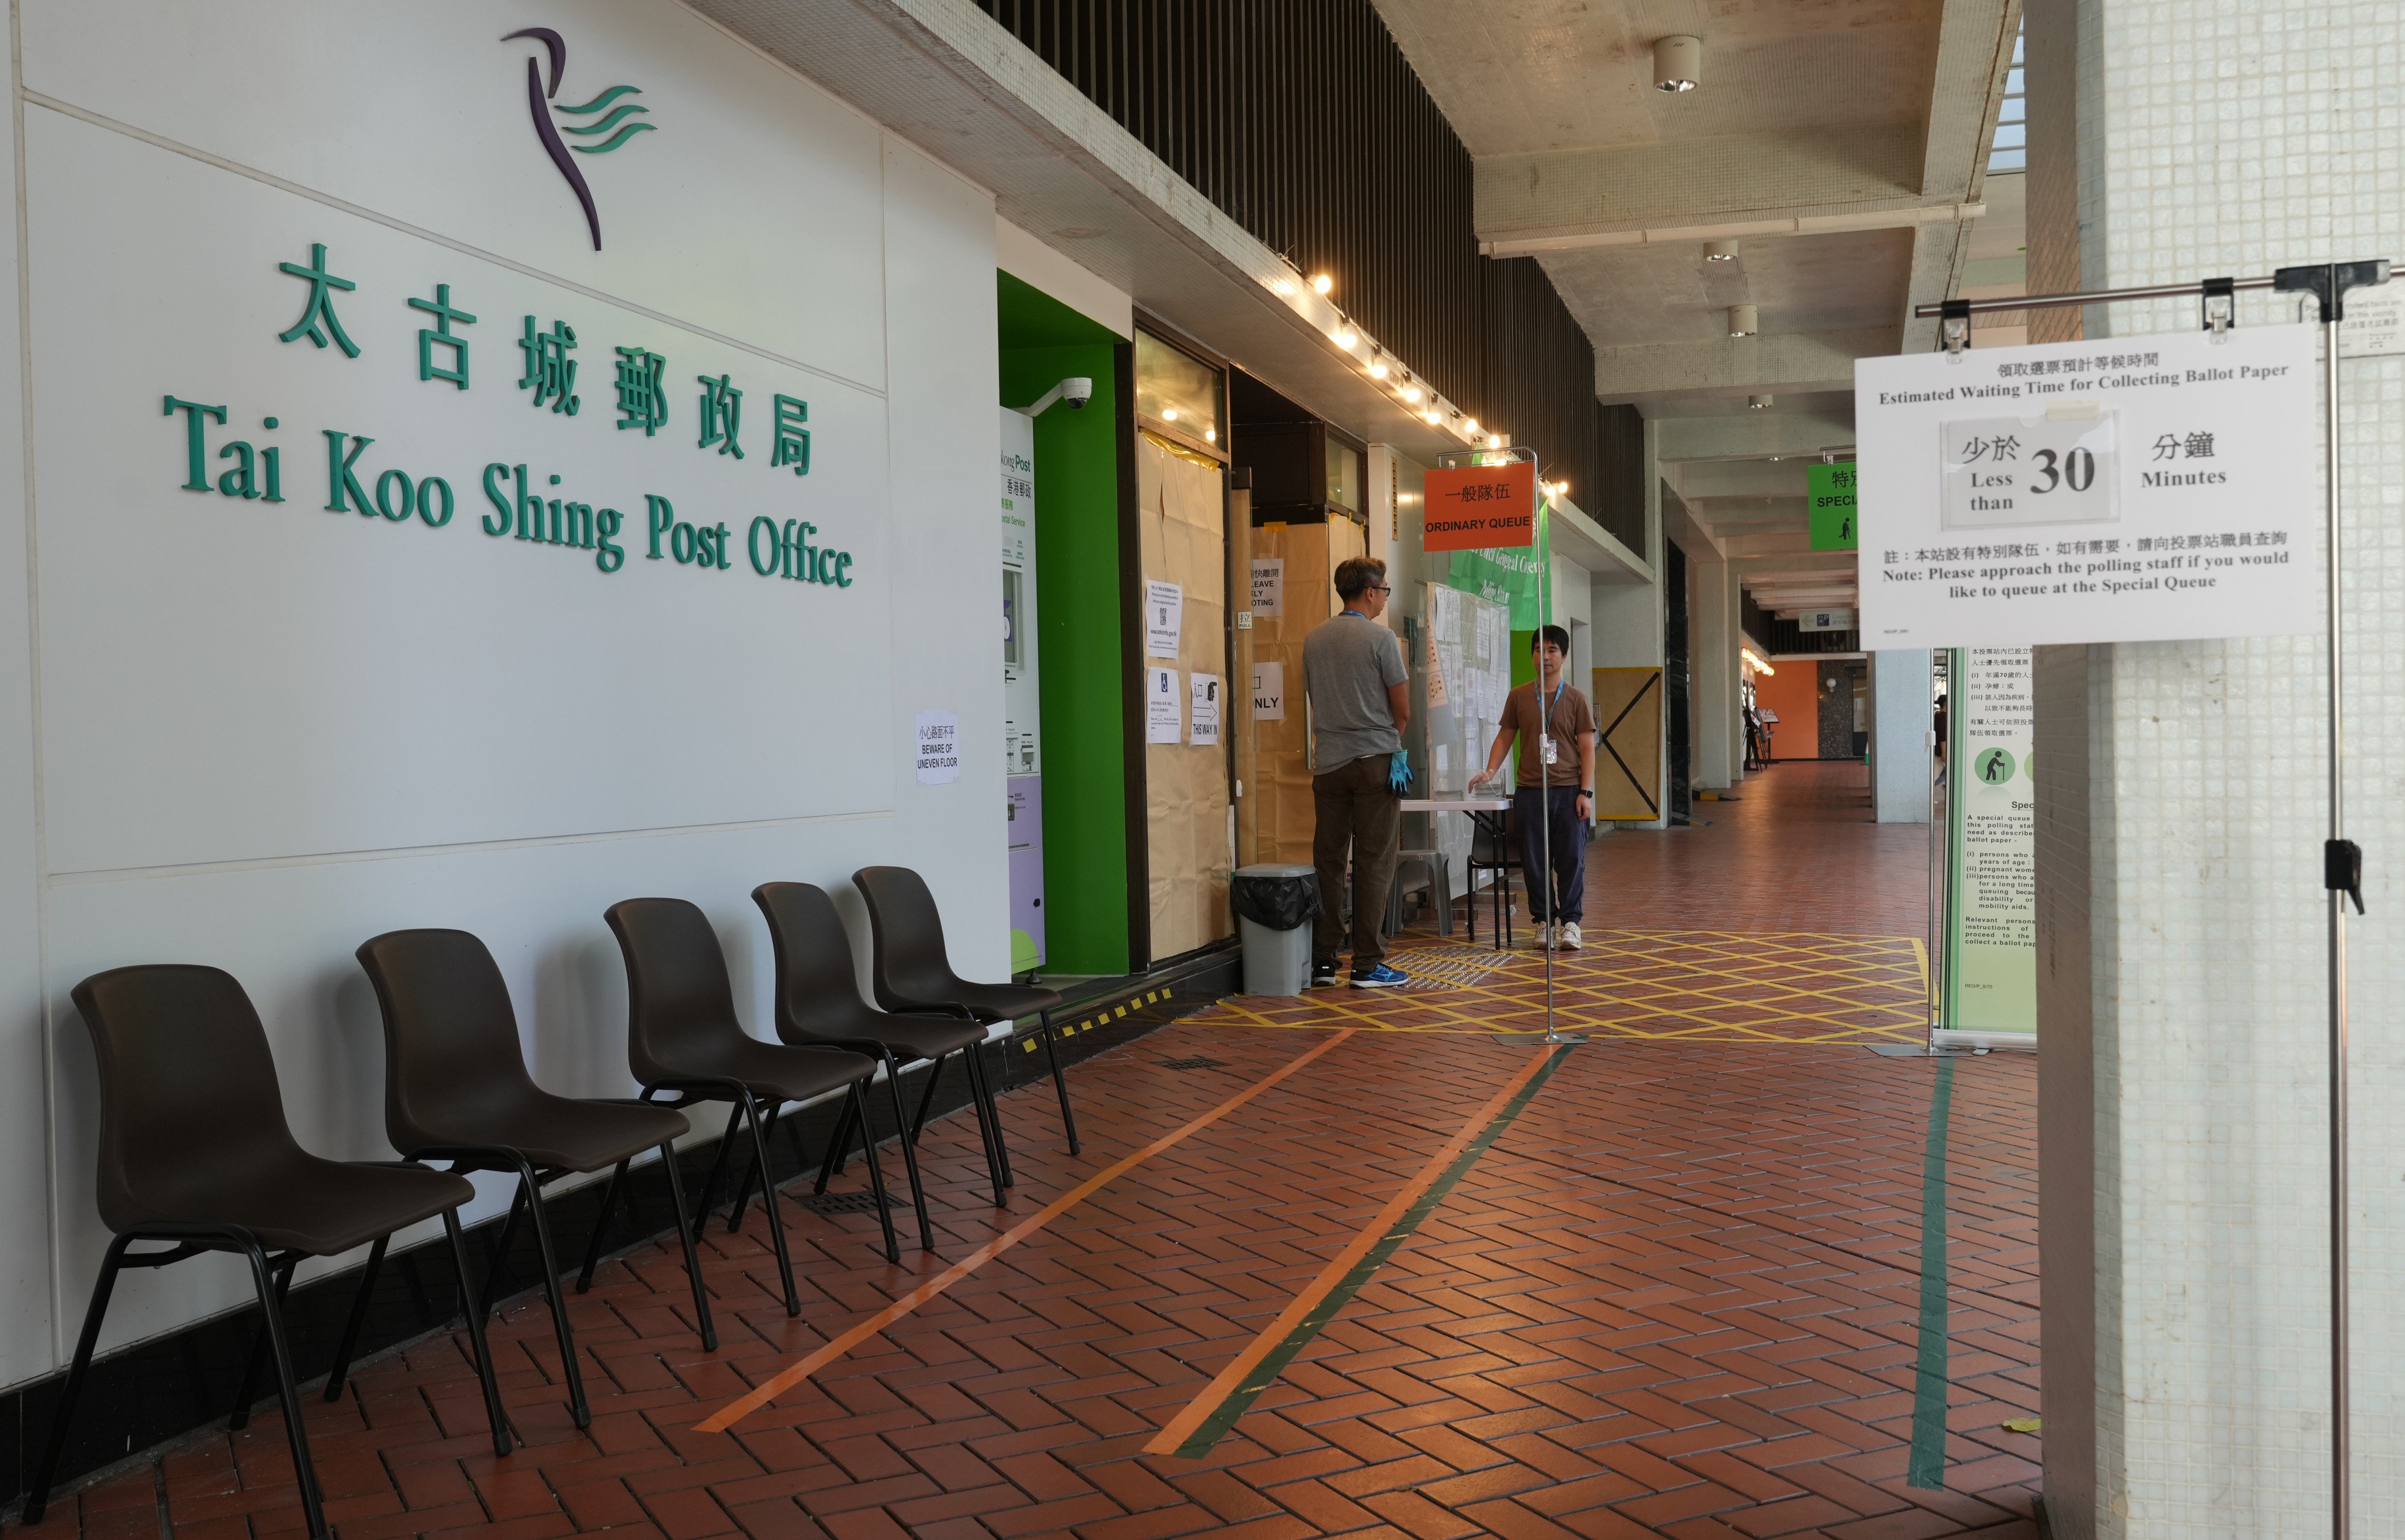 A polling station in Tai Koo Shing. About 1.2 million residents cast their votes on Sunday, falling well short of levels seen in the most recent 2019 municipal-level election. Photo: Sam Tsang